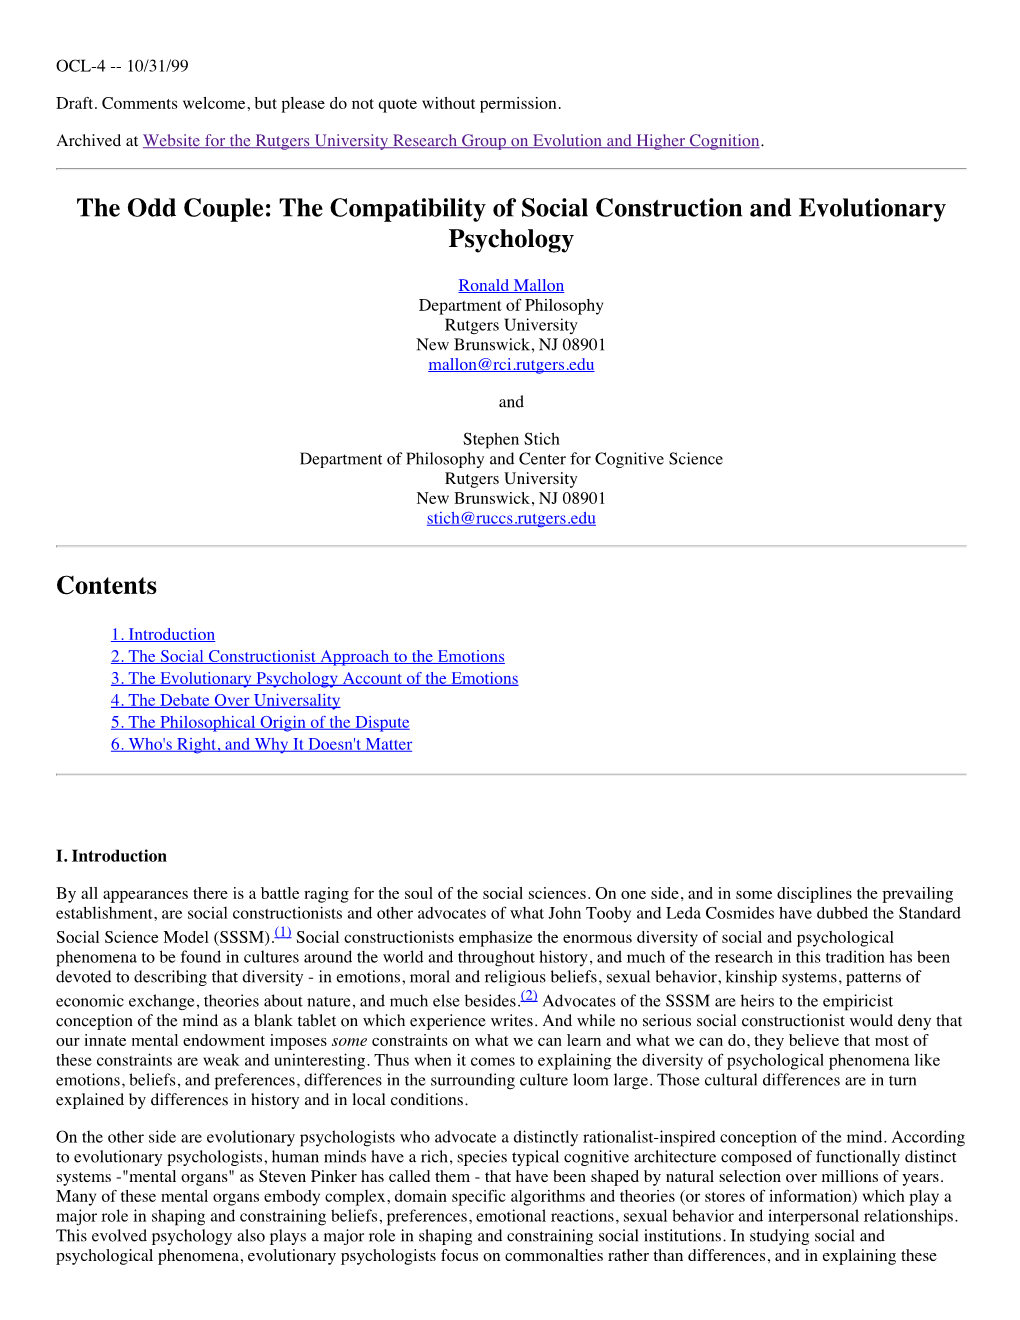 The Odd Couple: the Compatibility of Social Construction and Evolutionary Psychology Contents